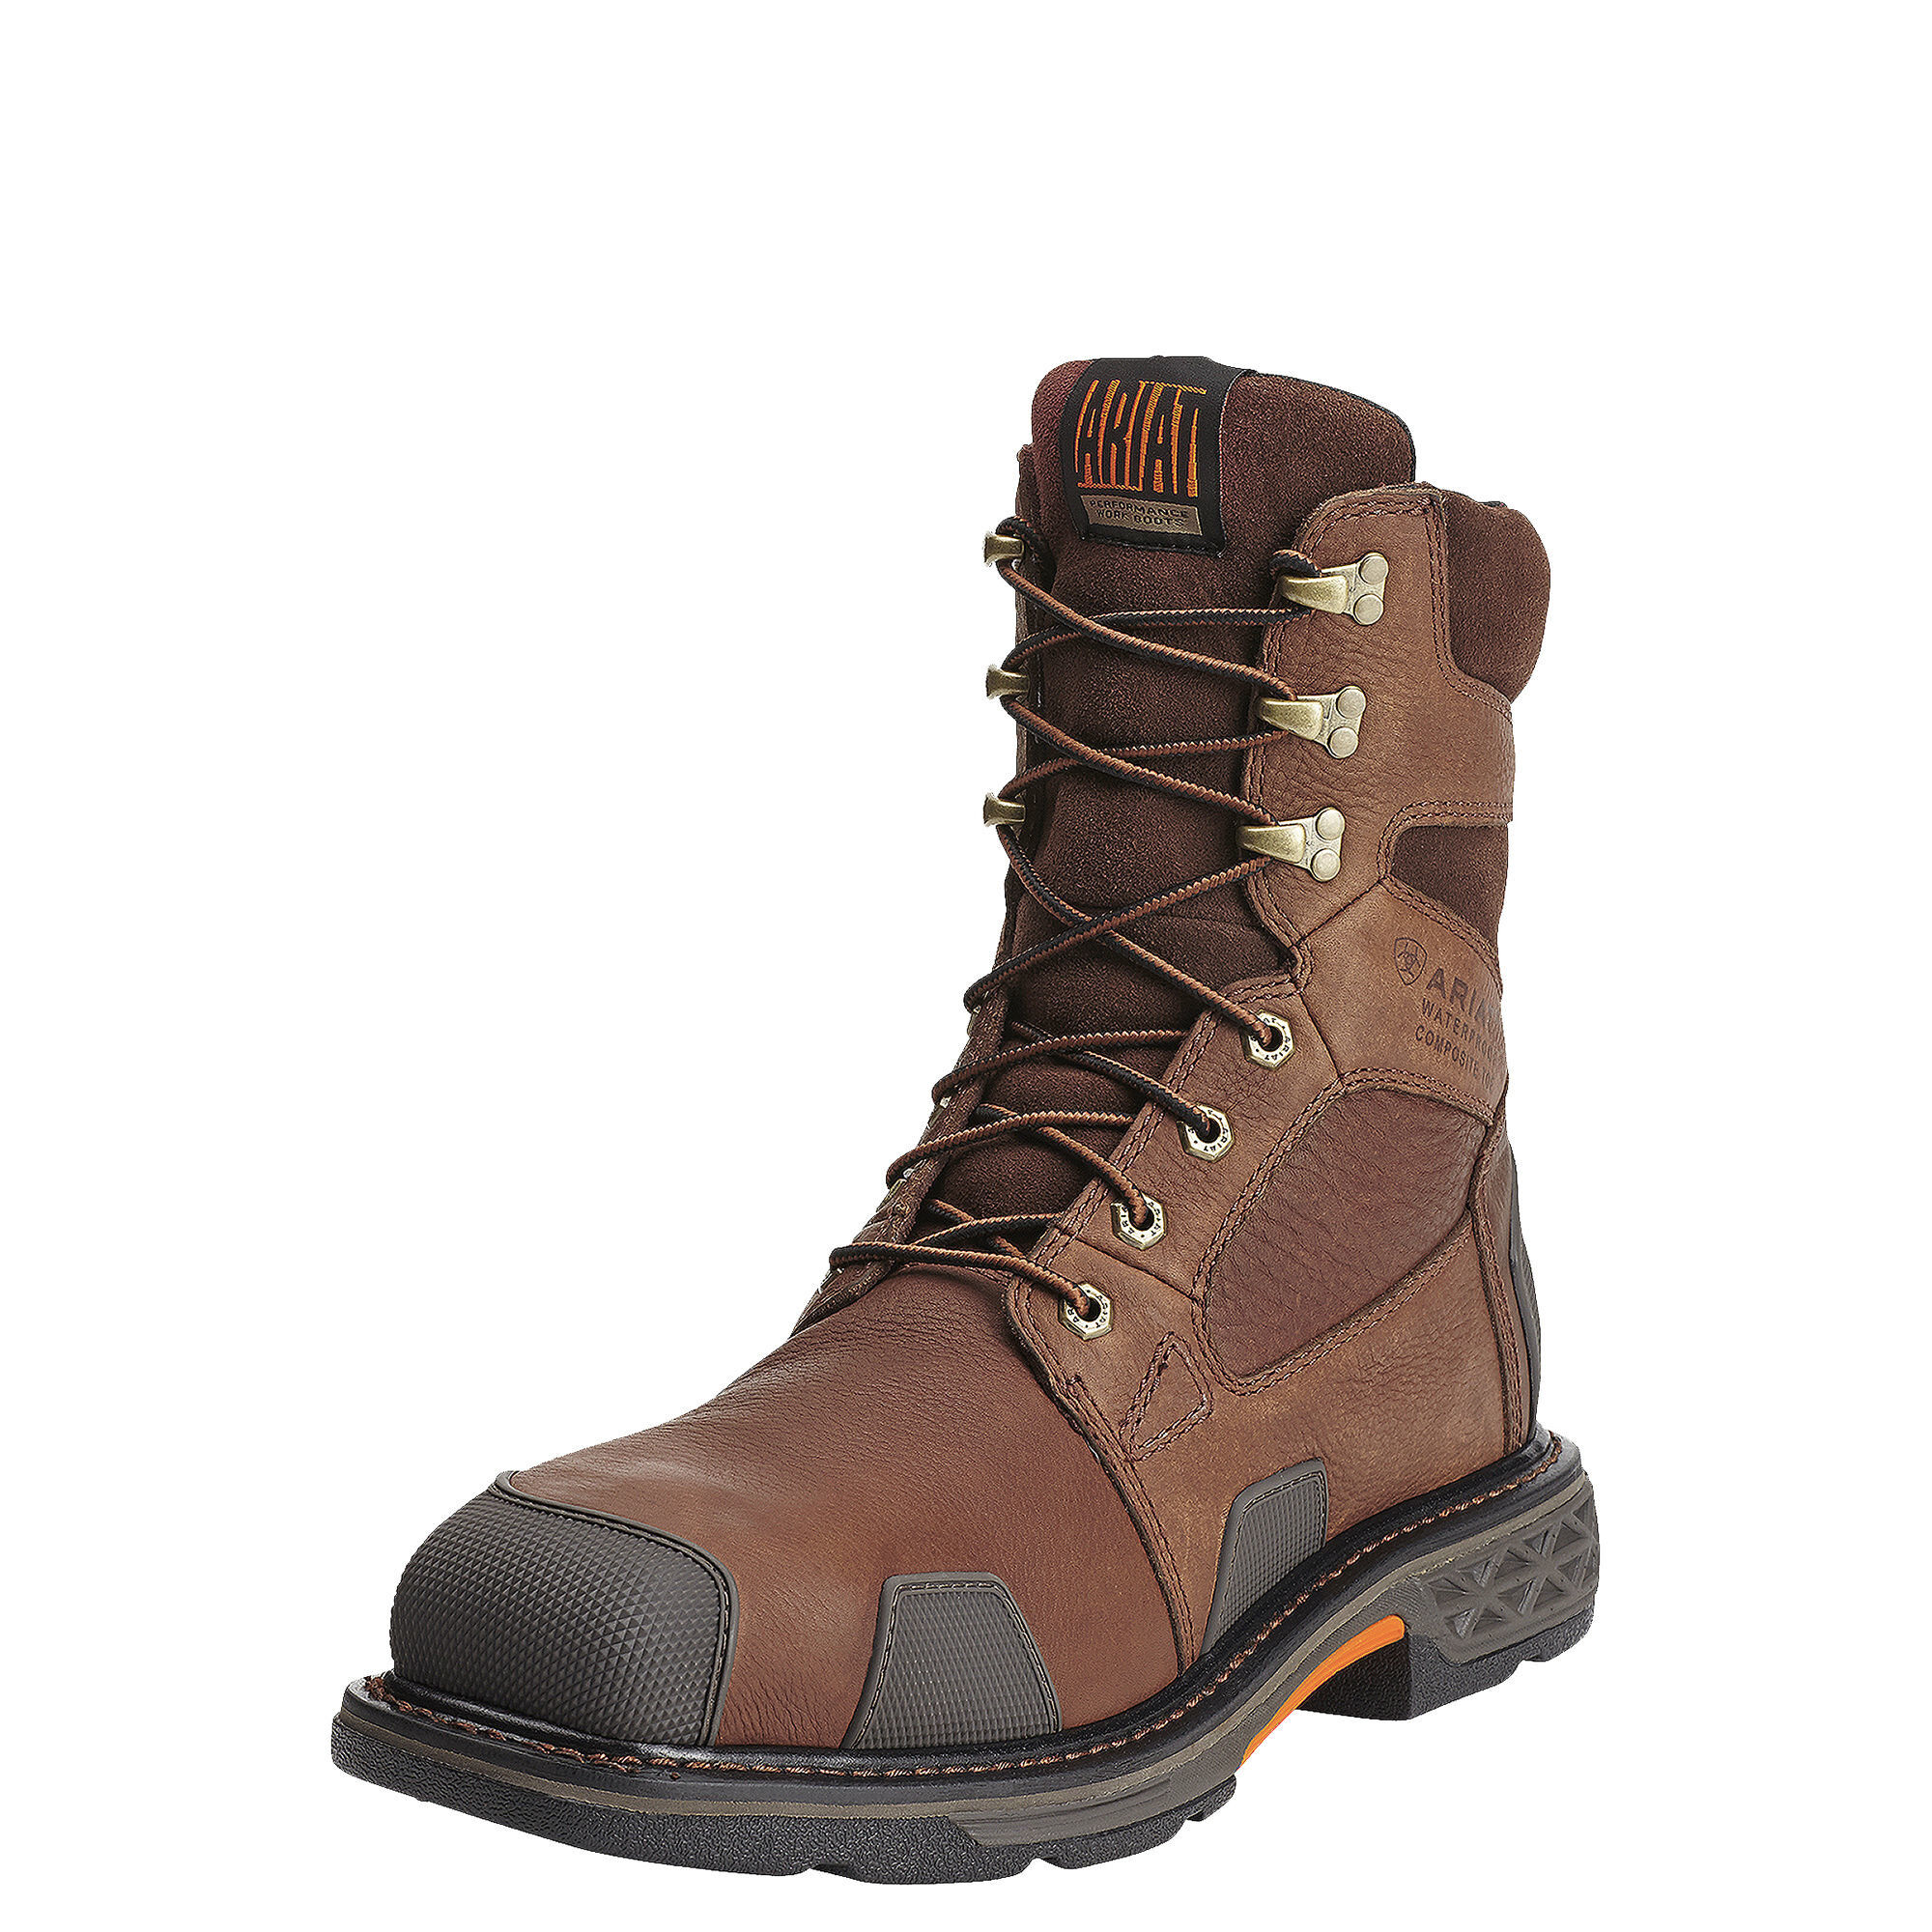 trojan extreme comfort safety boots